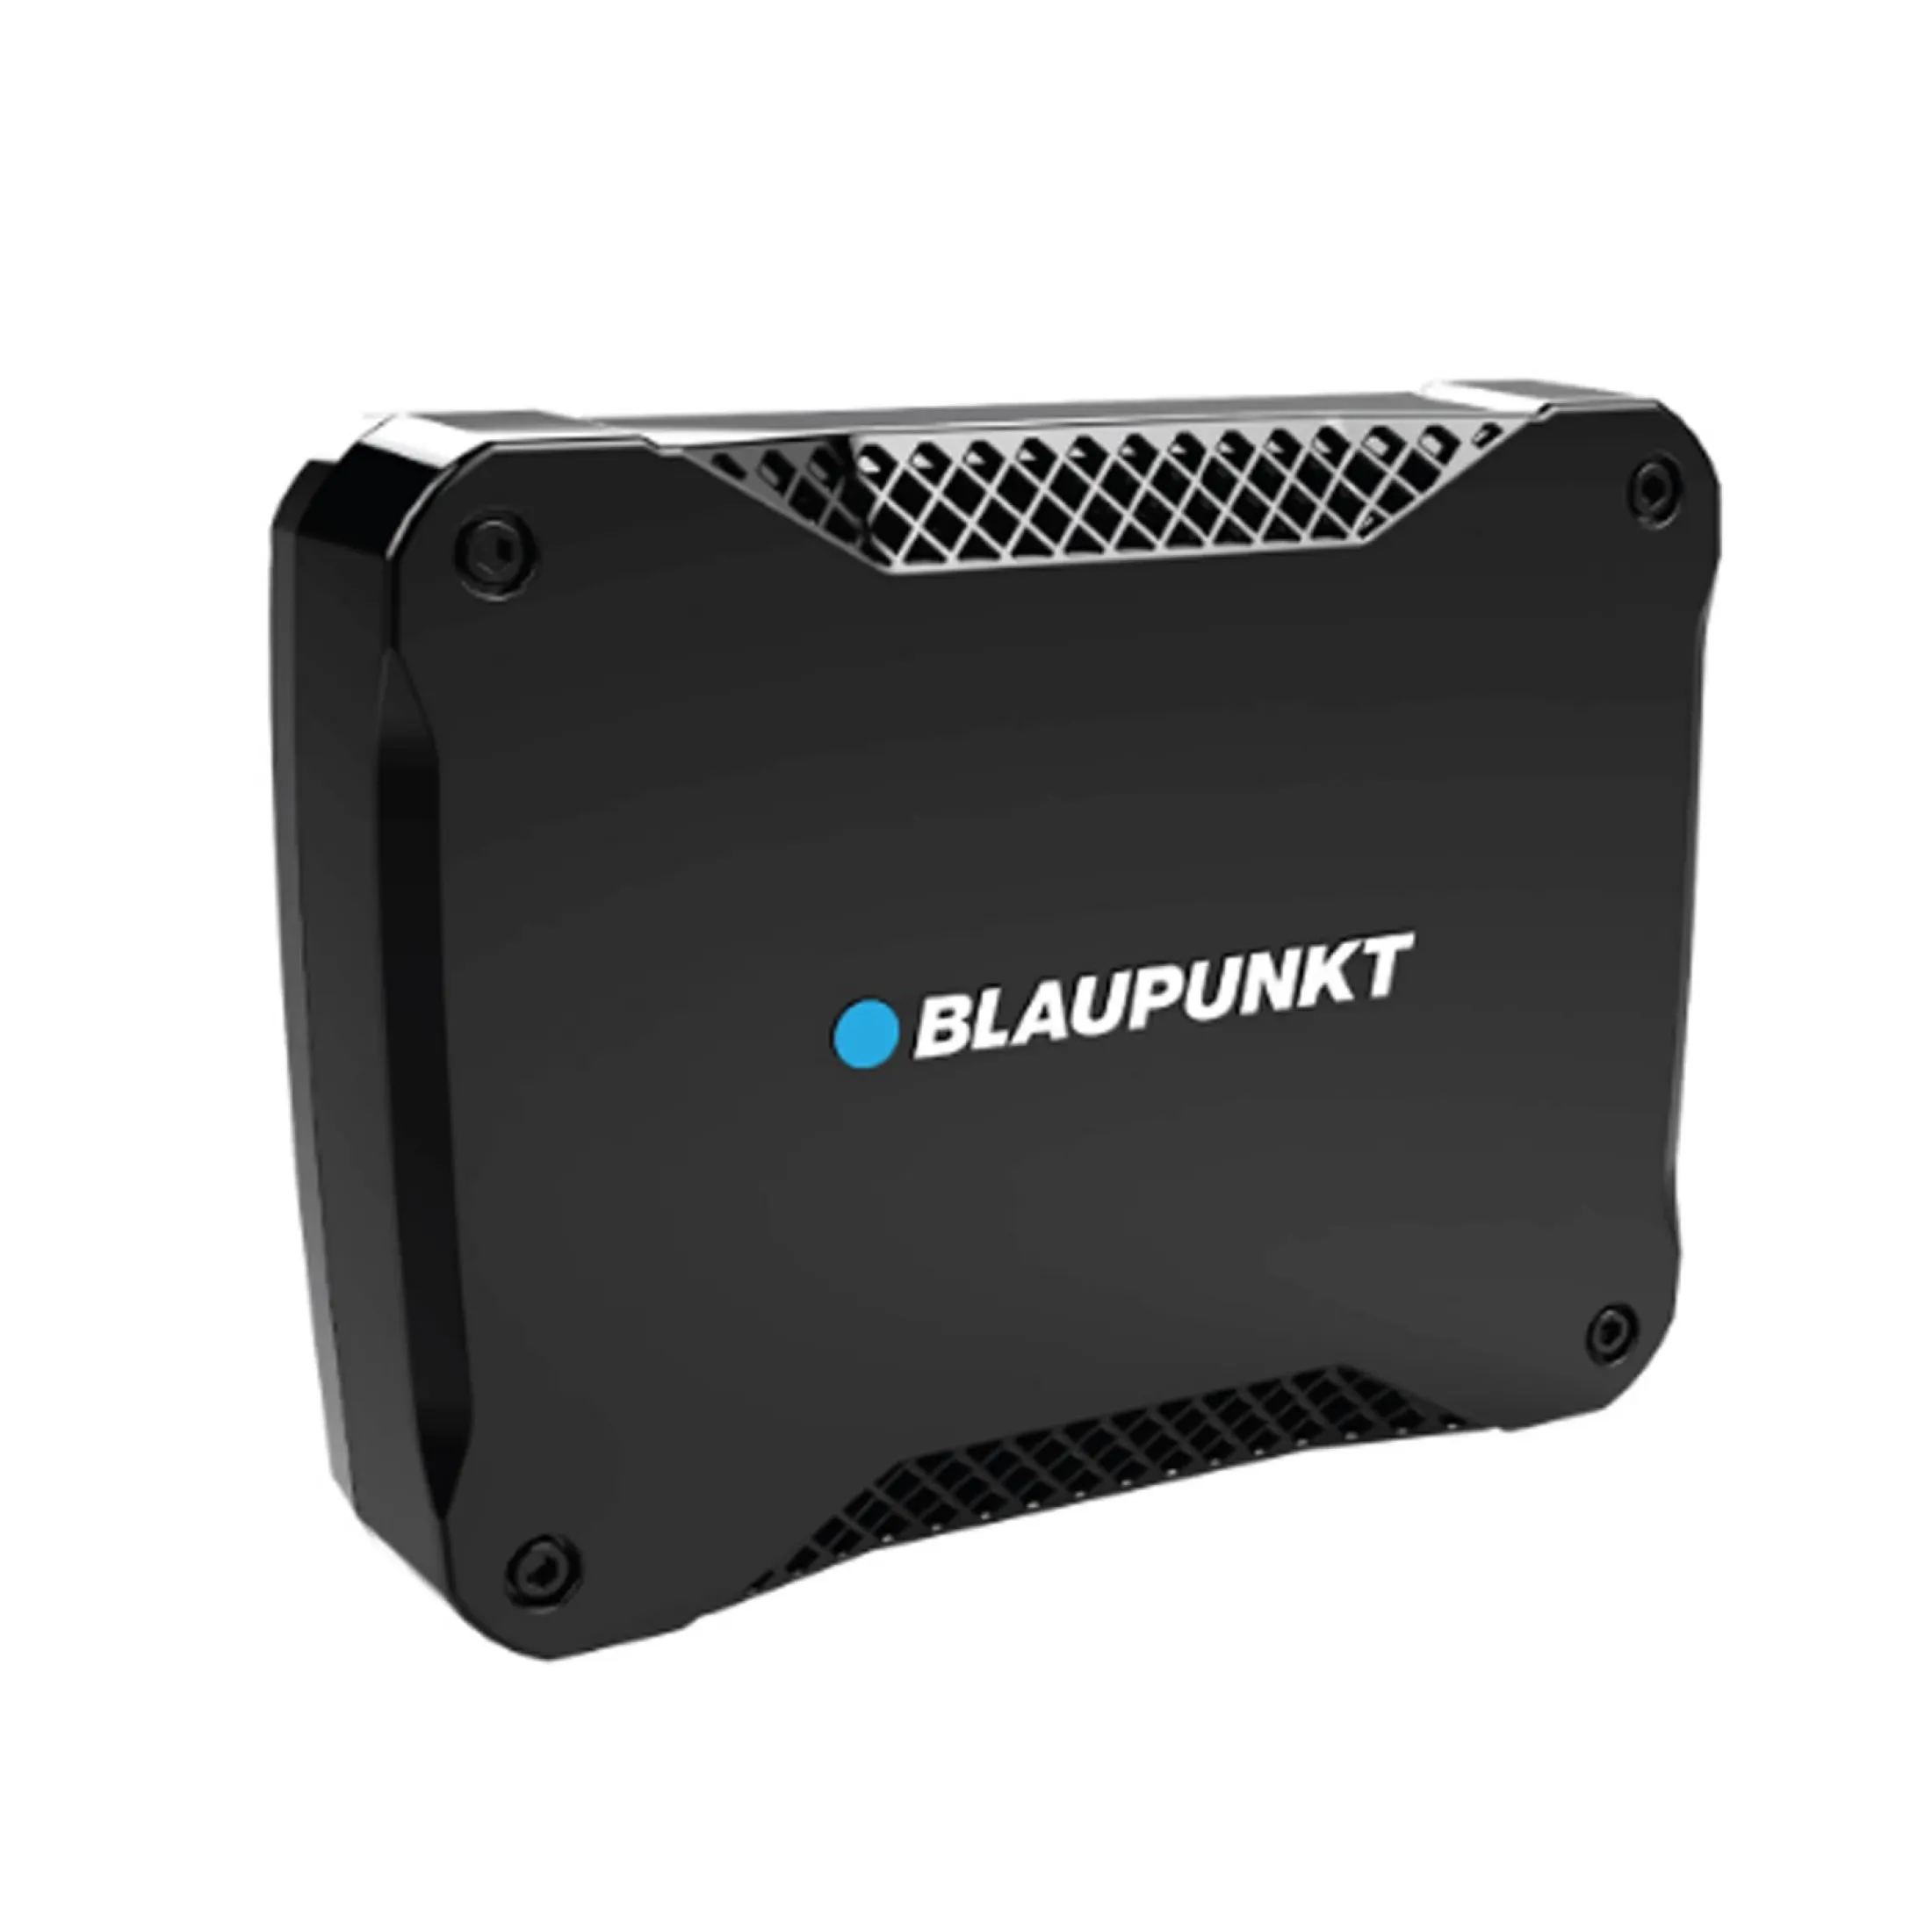 Blaupunkt Active Subwoofer Xlf180a 450 Max Power 3 Firing Position Flexible Position Of Up Down Side Lazada Ph